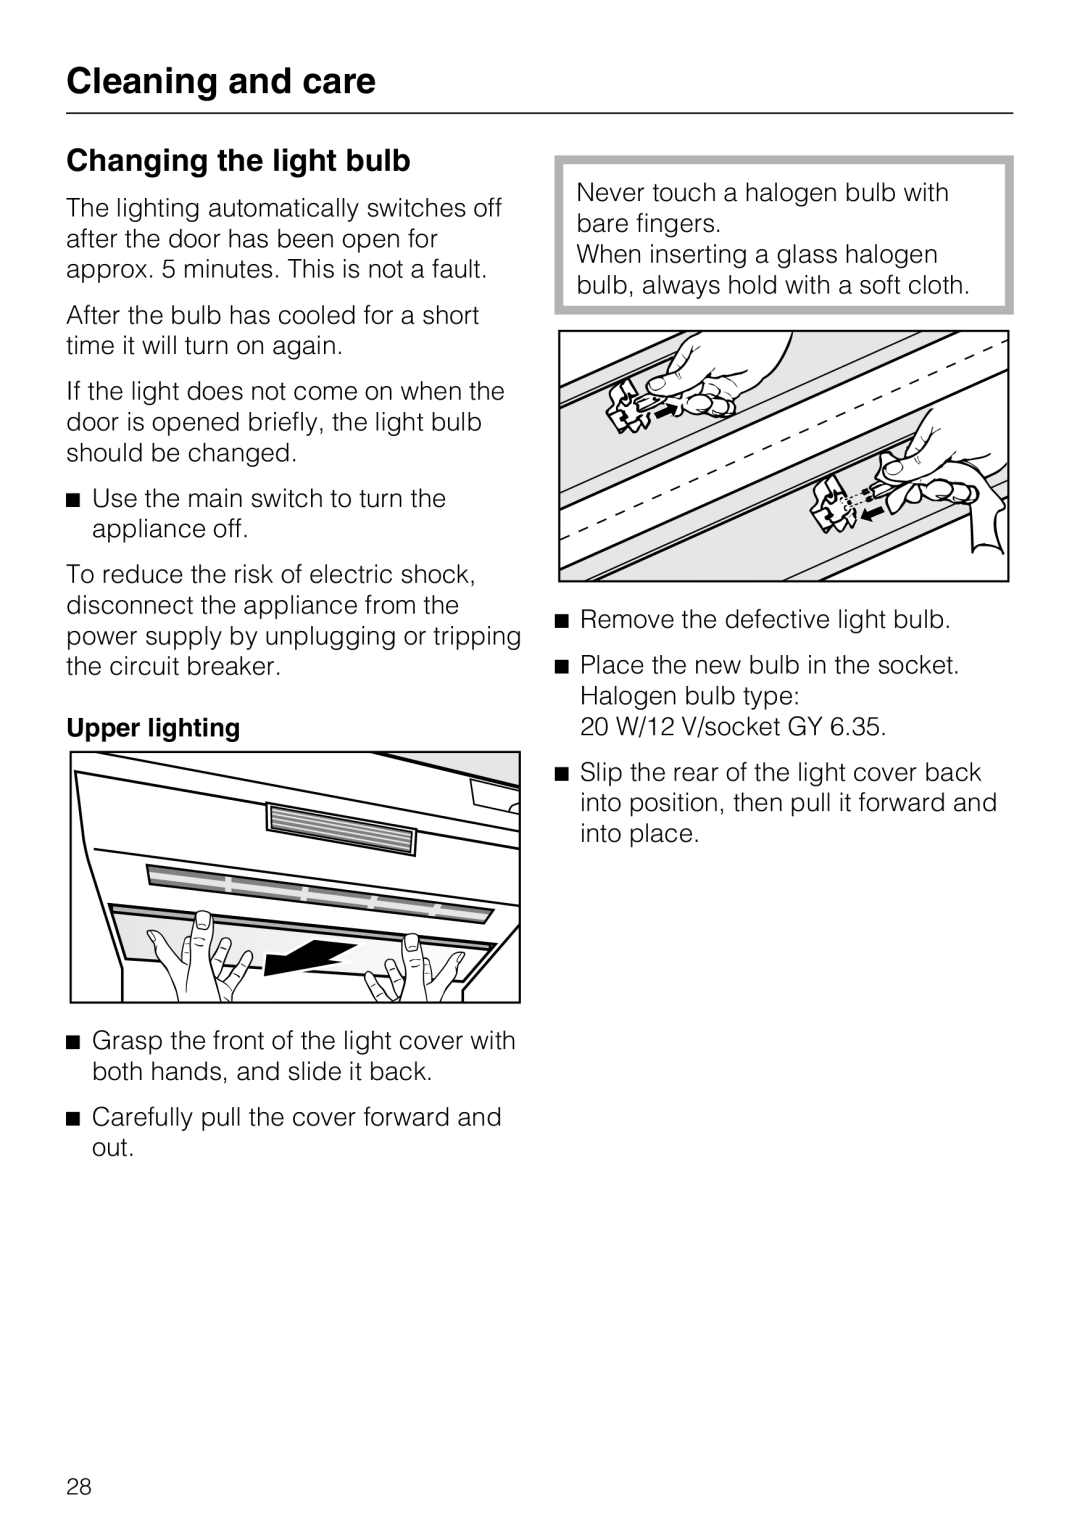 Miele 09 920 570 installation instructions Changing the light bulb, Cleaning and care, Upper lighting 